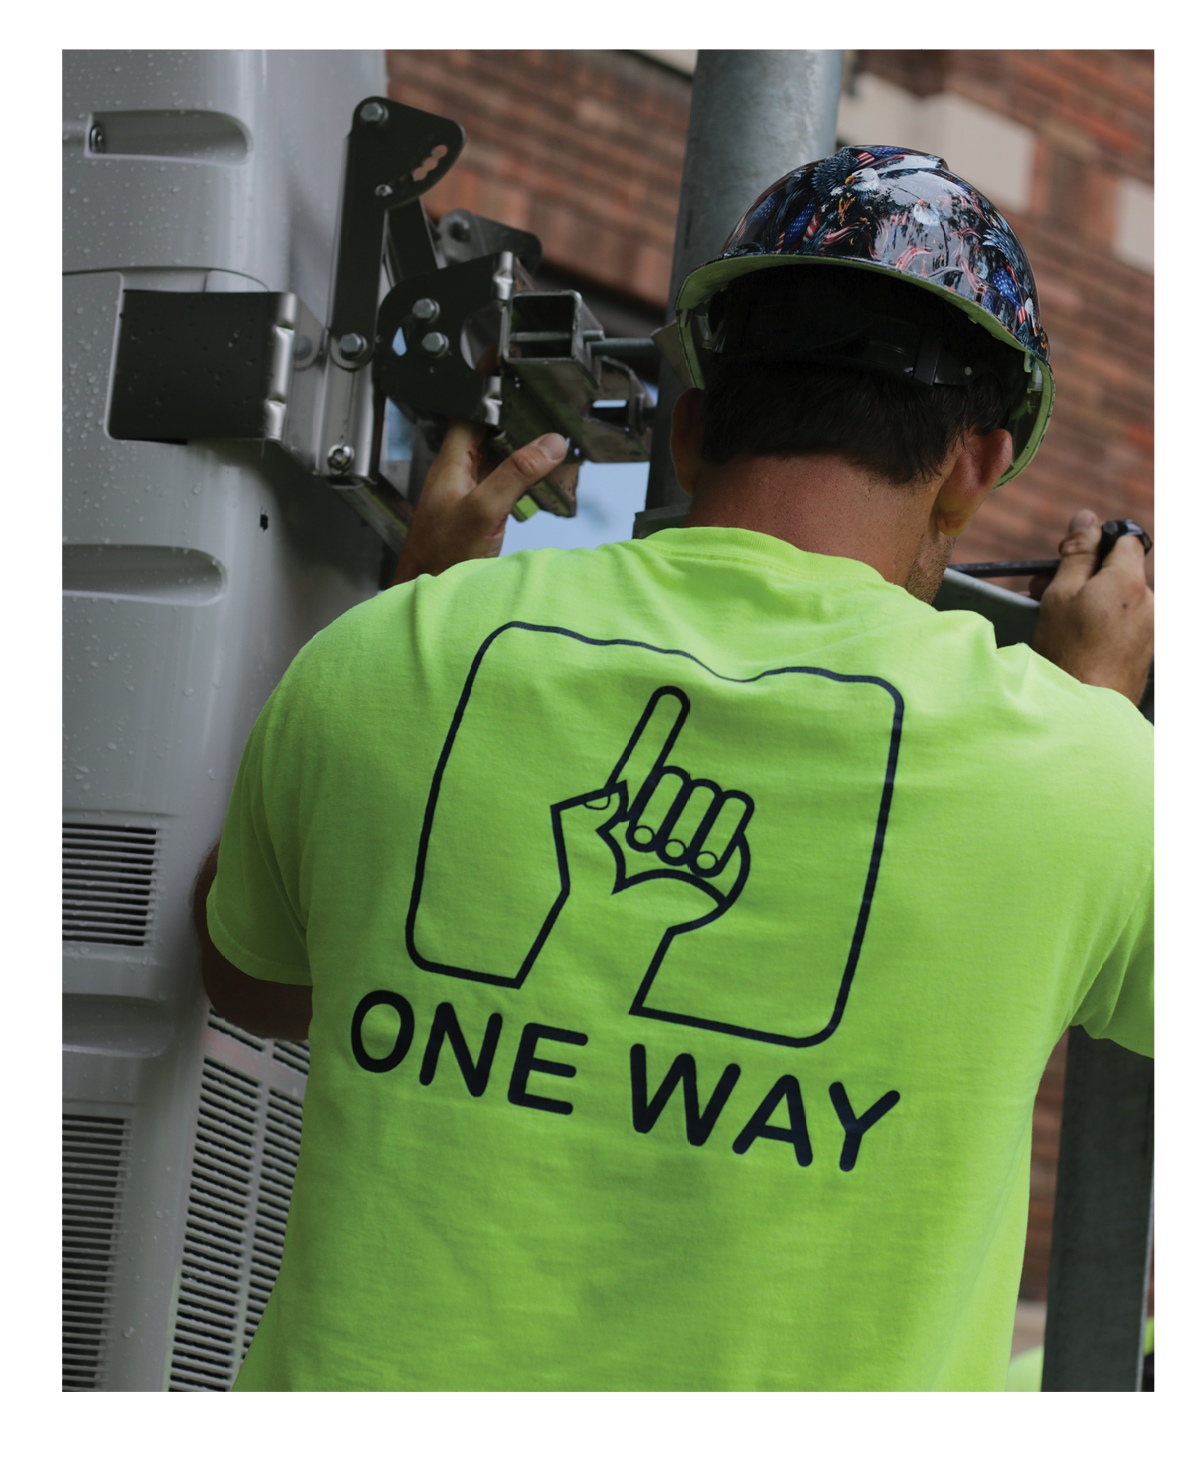 One Way T-shirt on Construction Worker